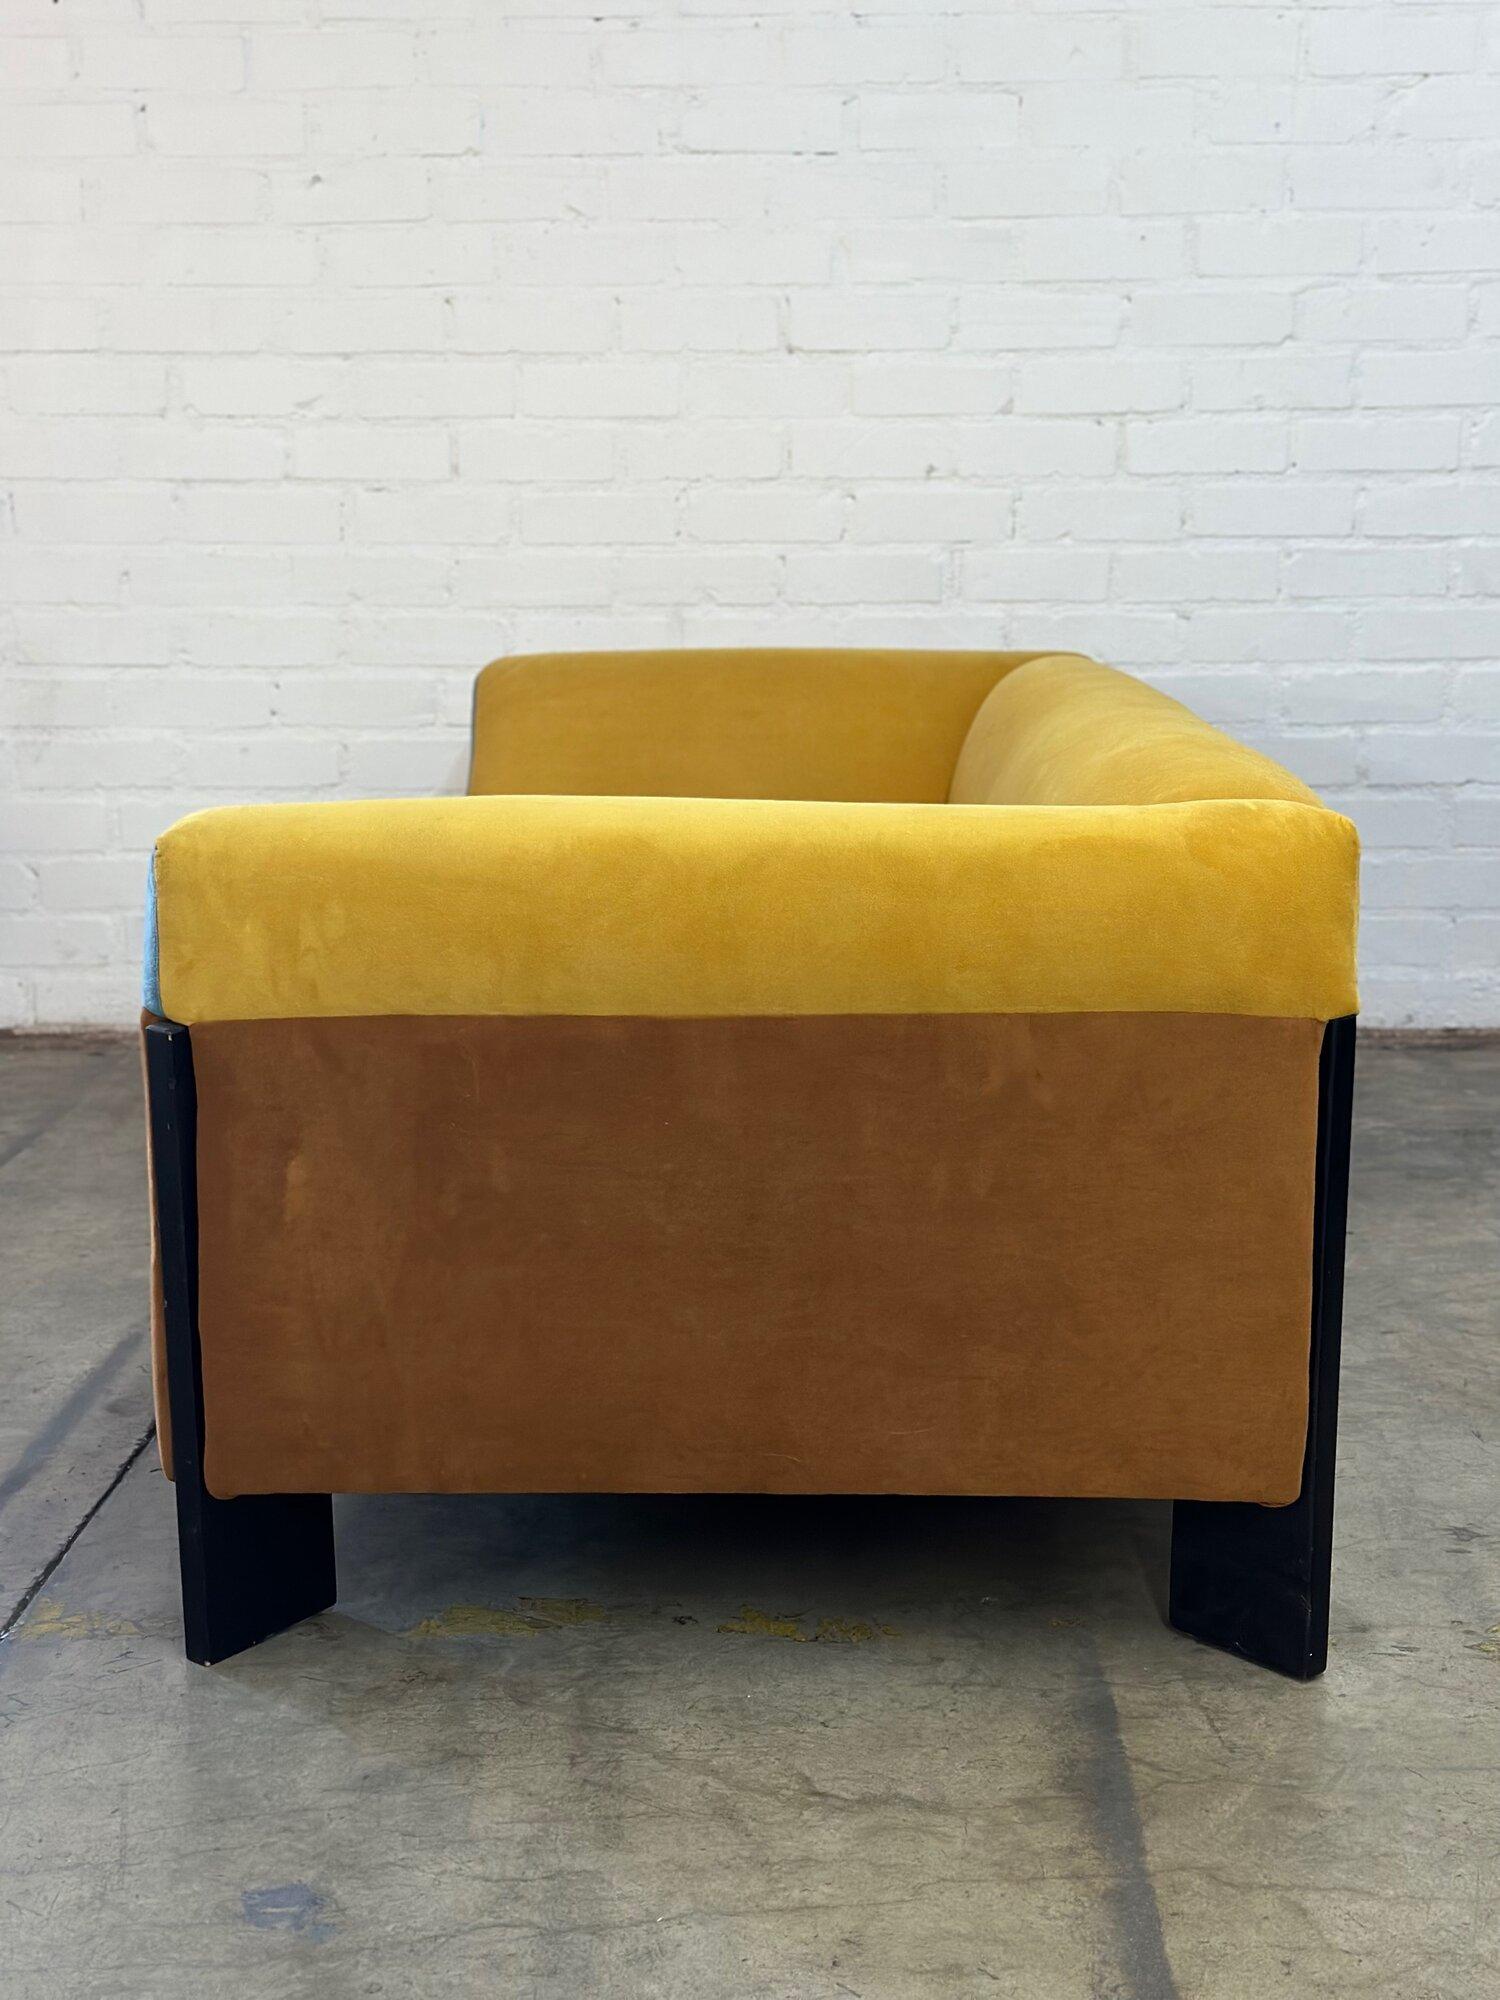 Contemporary 70s Retro Style “Open Arms Sofa” - AS IS